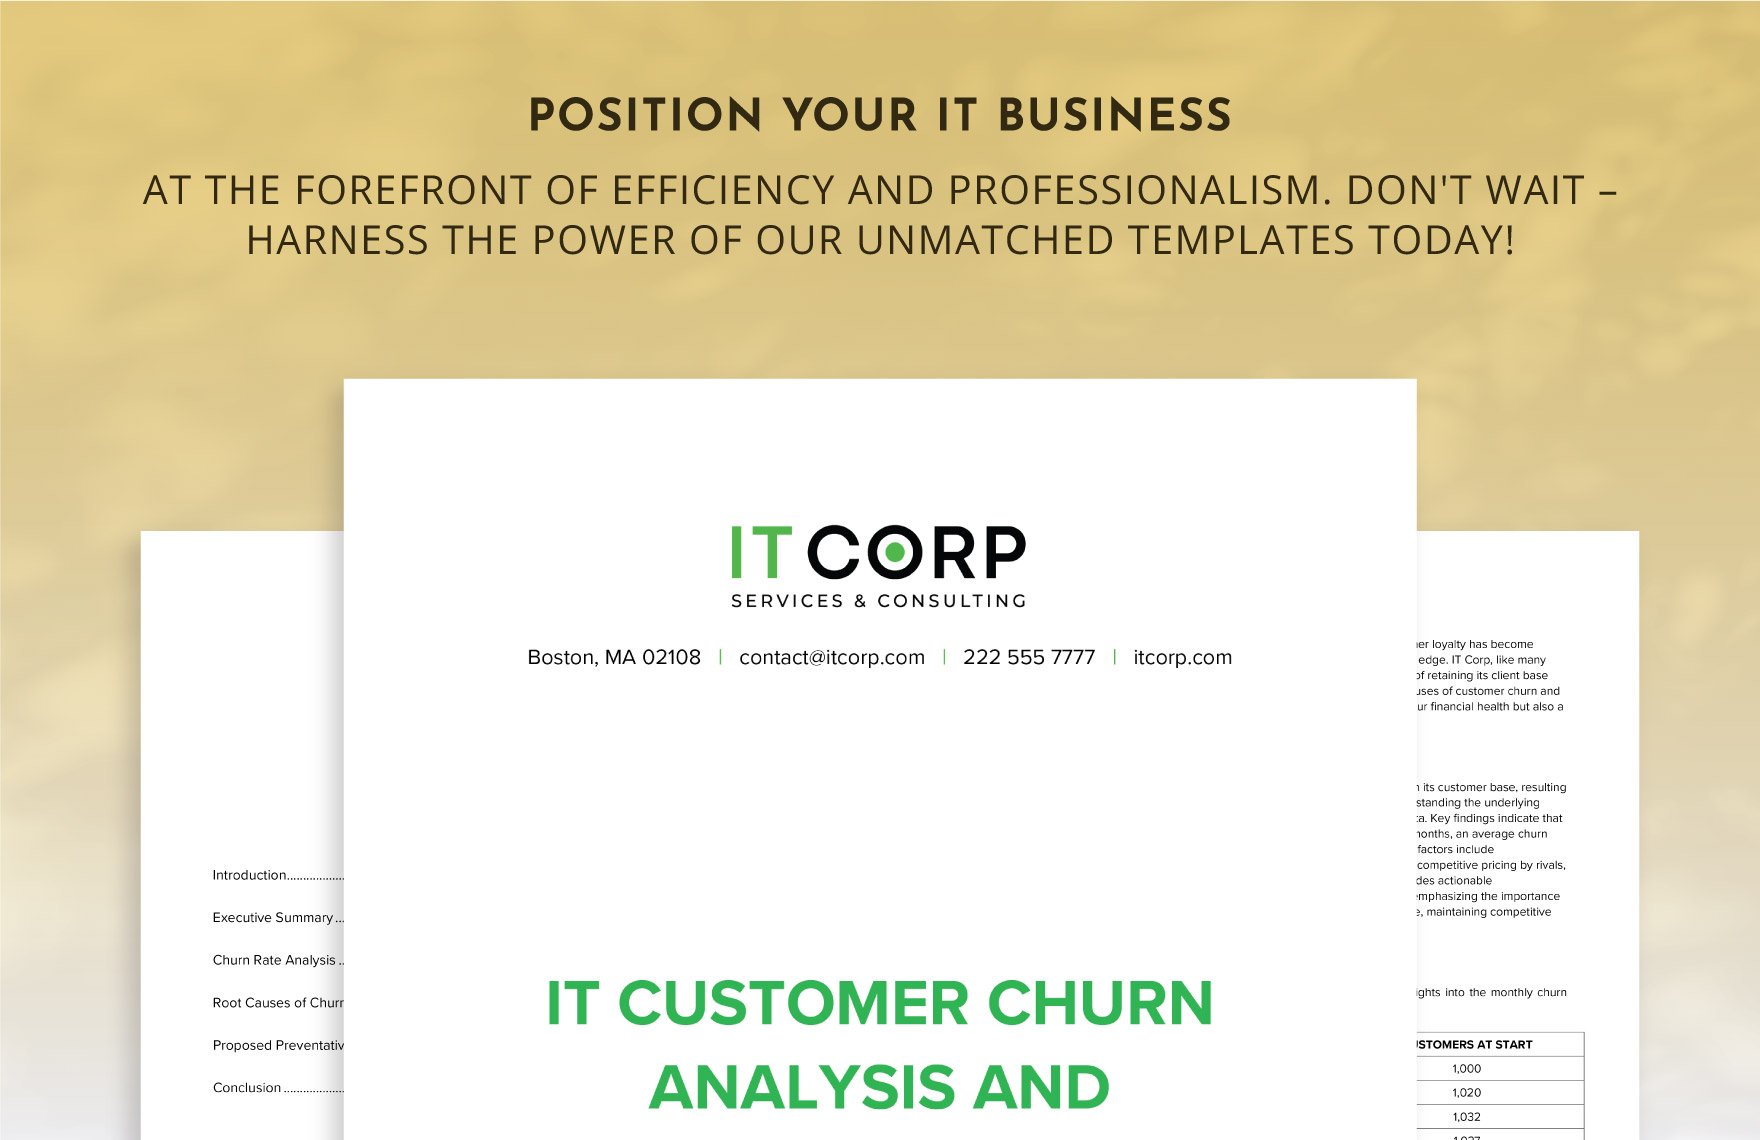 IT Customer Churn Analysis and Prevention Report Template